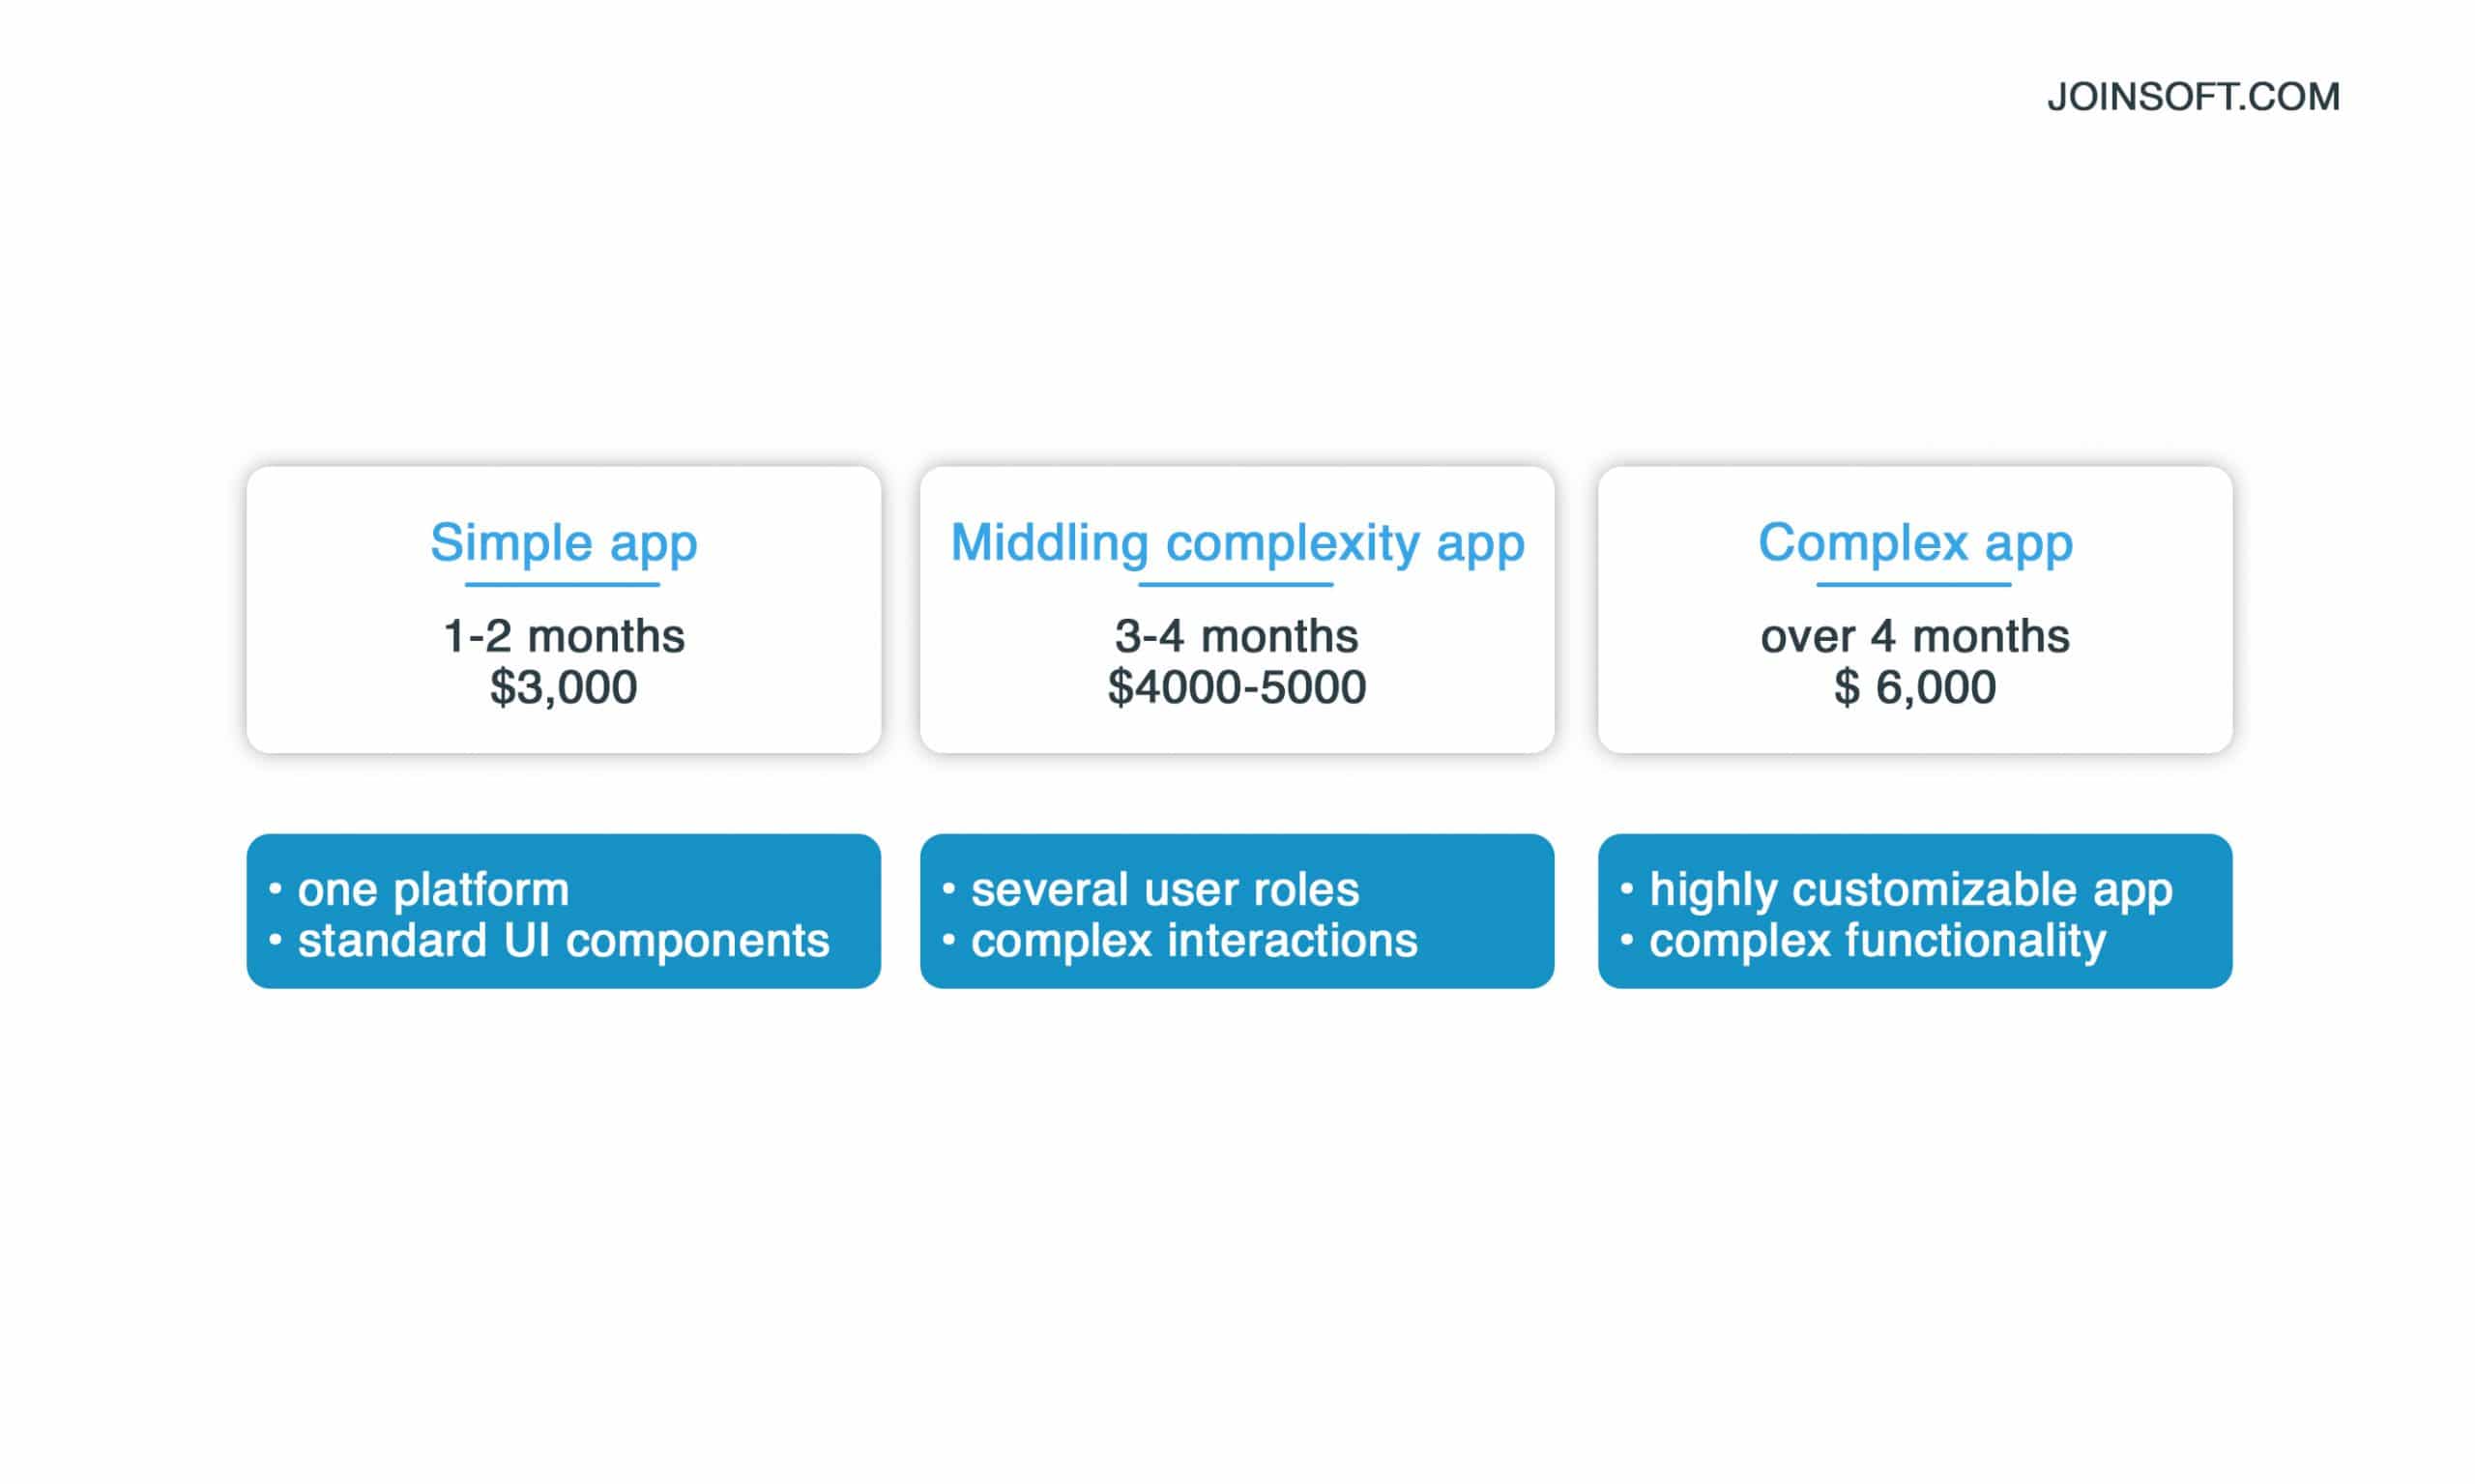 How Much Does It Cost To Design An Average App